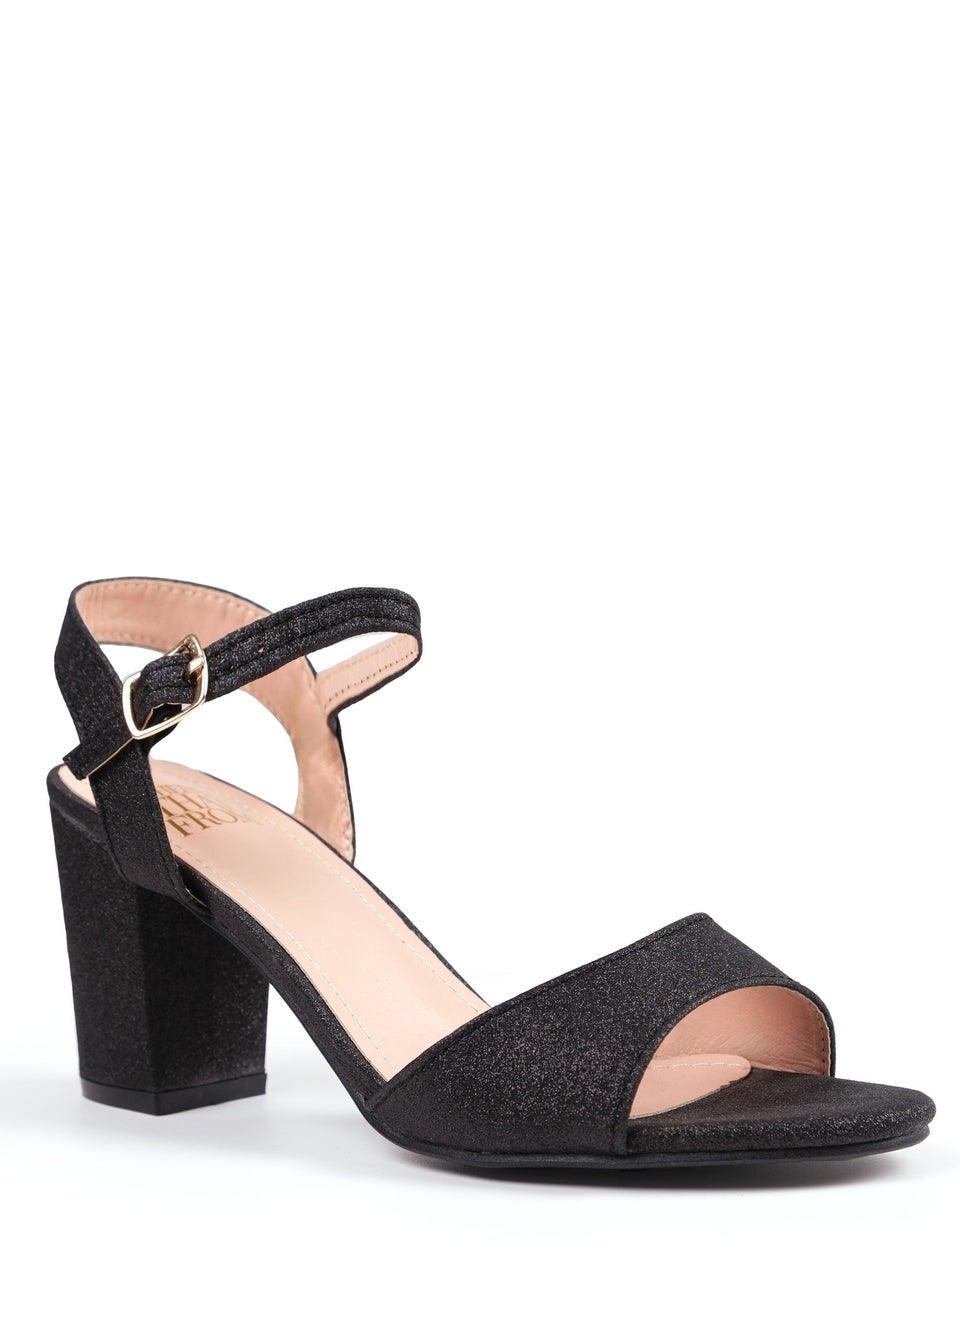 Where's That From Black Glitter Paityn Low Block Heel Sandals